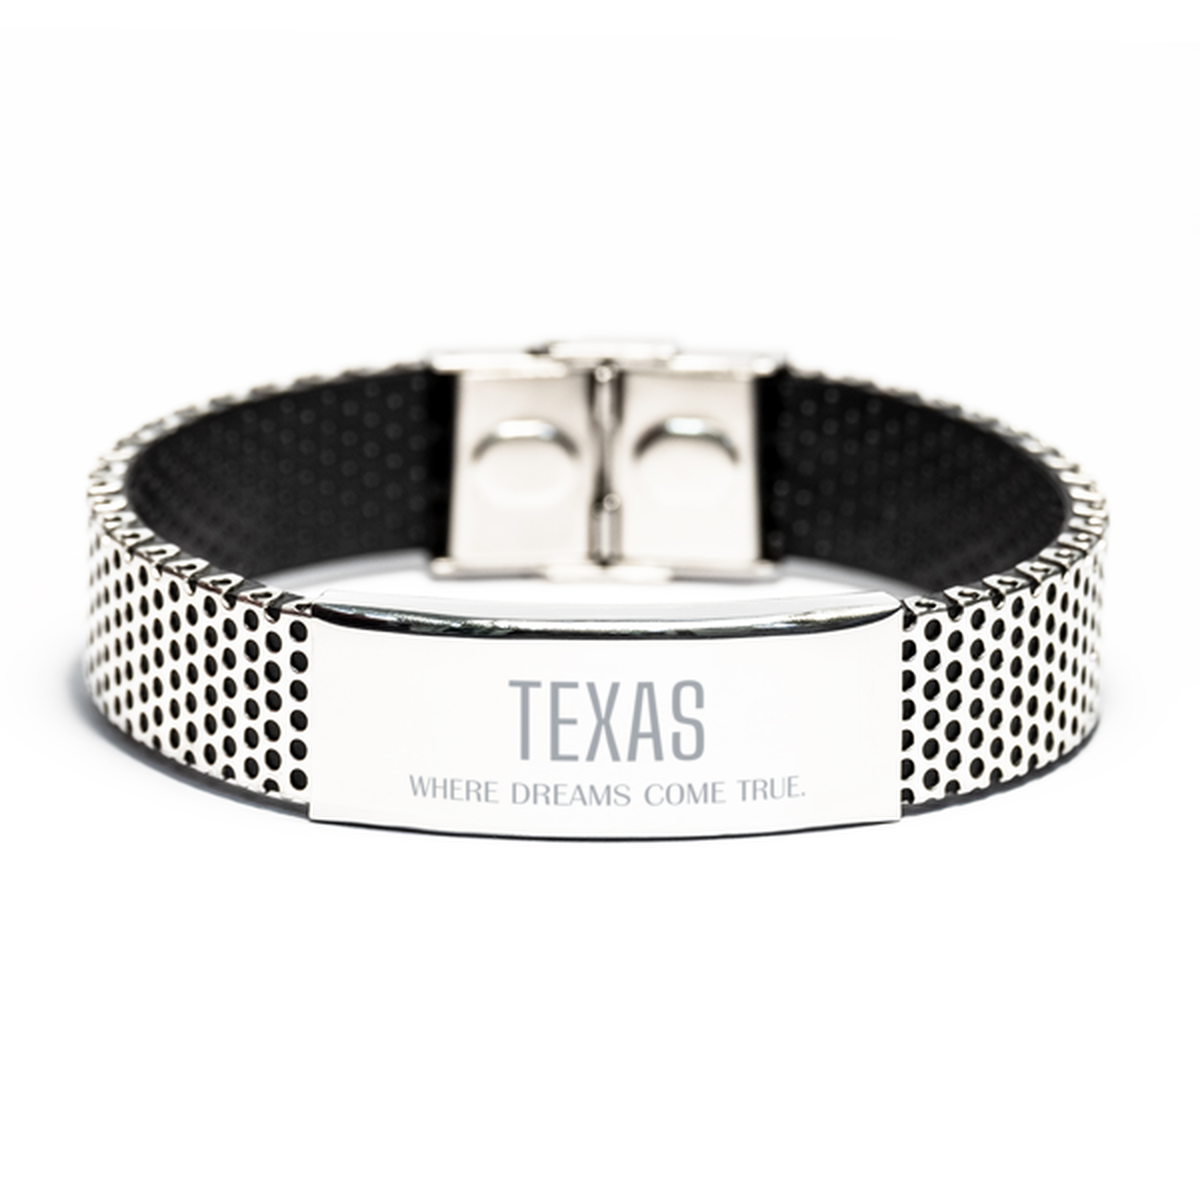 Love Texas State Stainless Steel Bracelet, Texas Where dreams come true, Birthday Inspirational Gifts For Texas Men, Women, Friends